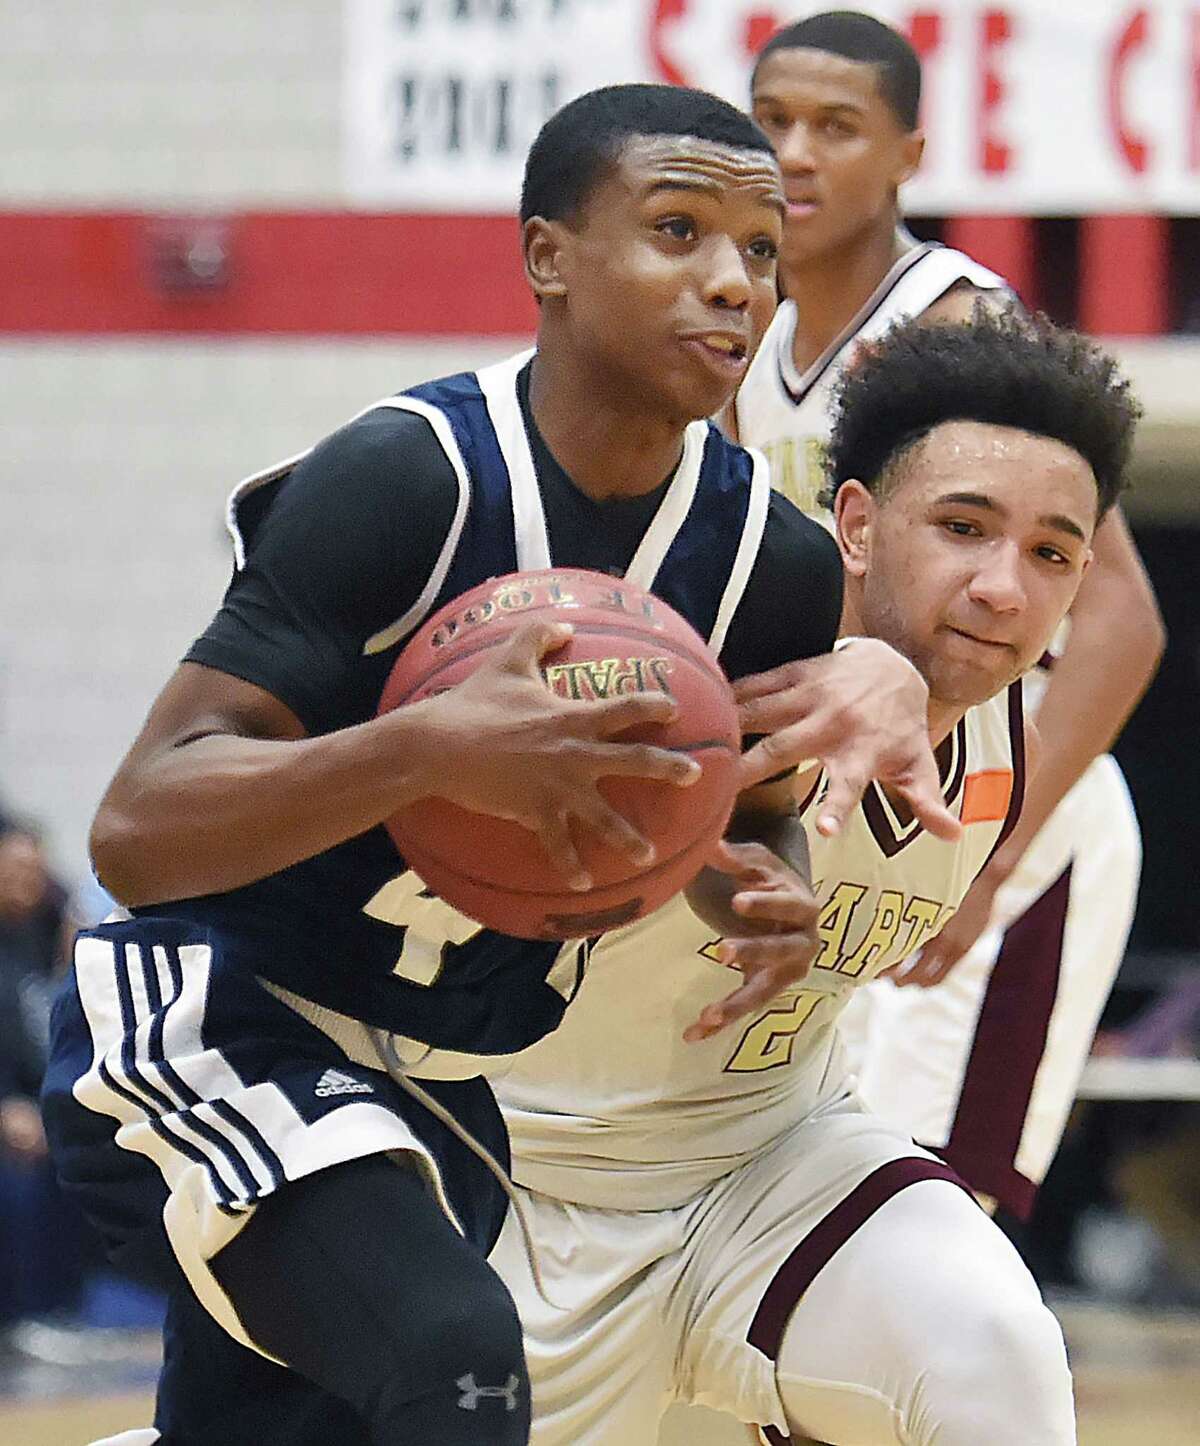 Hillhouse sophomore Tazhon Daniels moves to the hoop as Sacred Heart-Waterbury senior Isiah Gaiter defends, Friday, March 9, 2018, in the CIAC Division 1 second-round game at the Crosby Palace at Crosby High School in Waterbury. Sacred Heart won, 69-58.